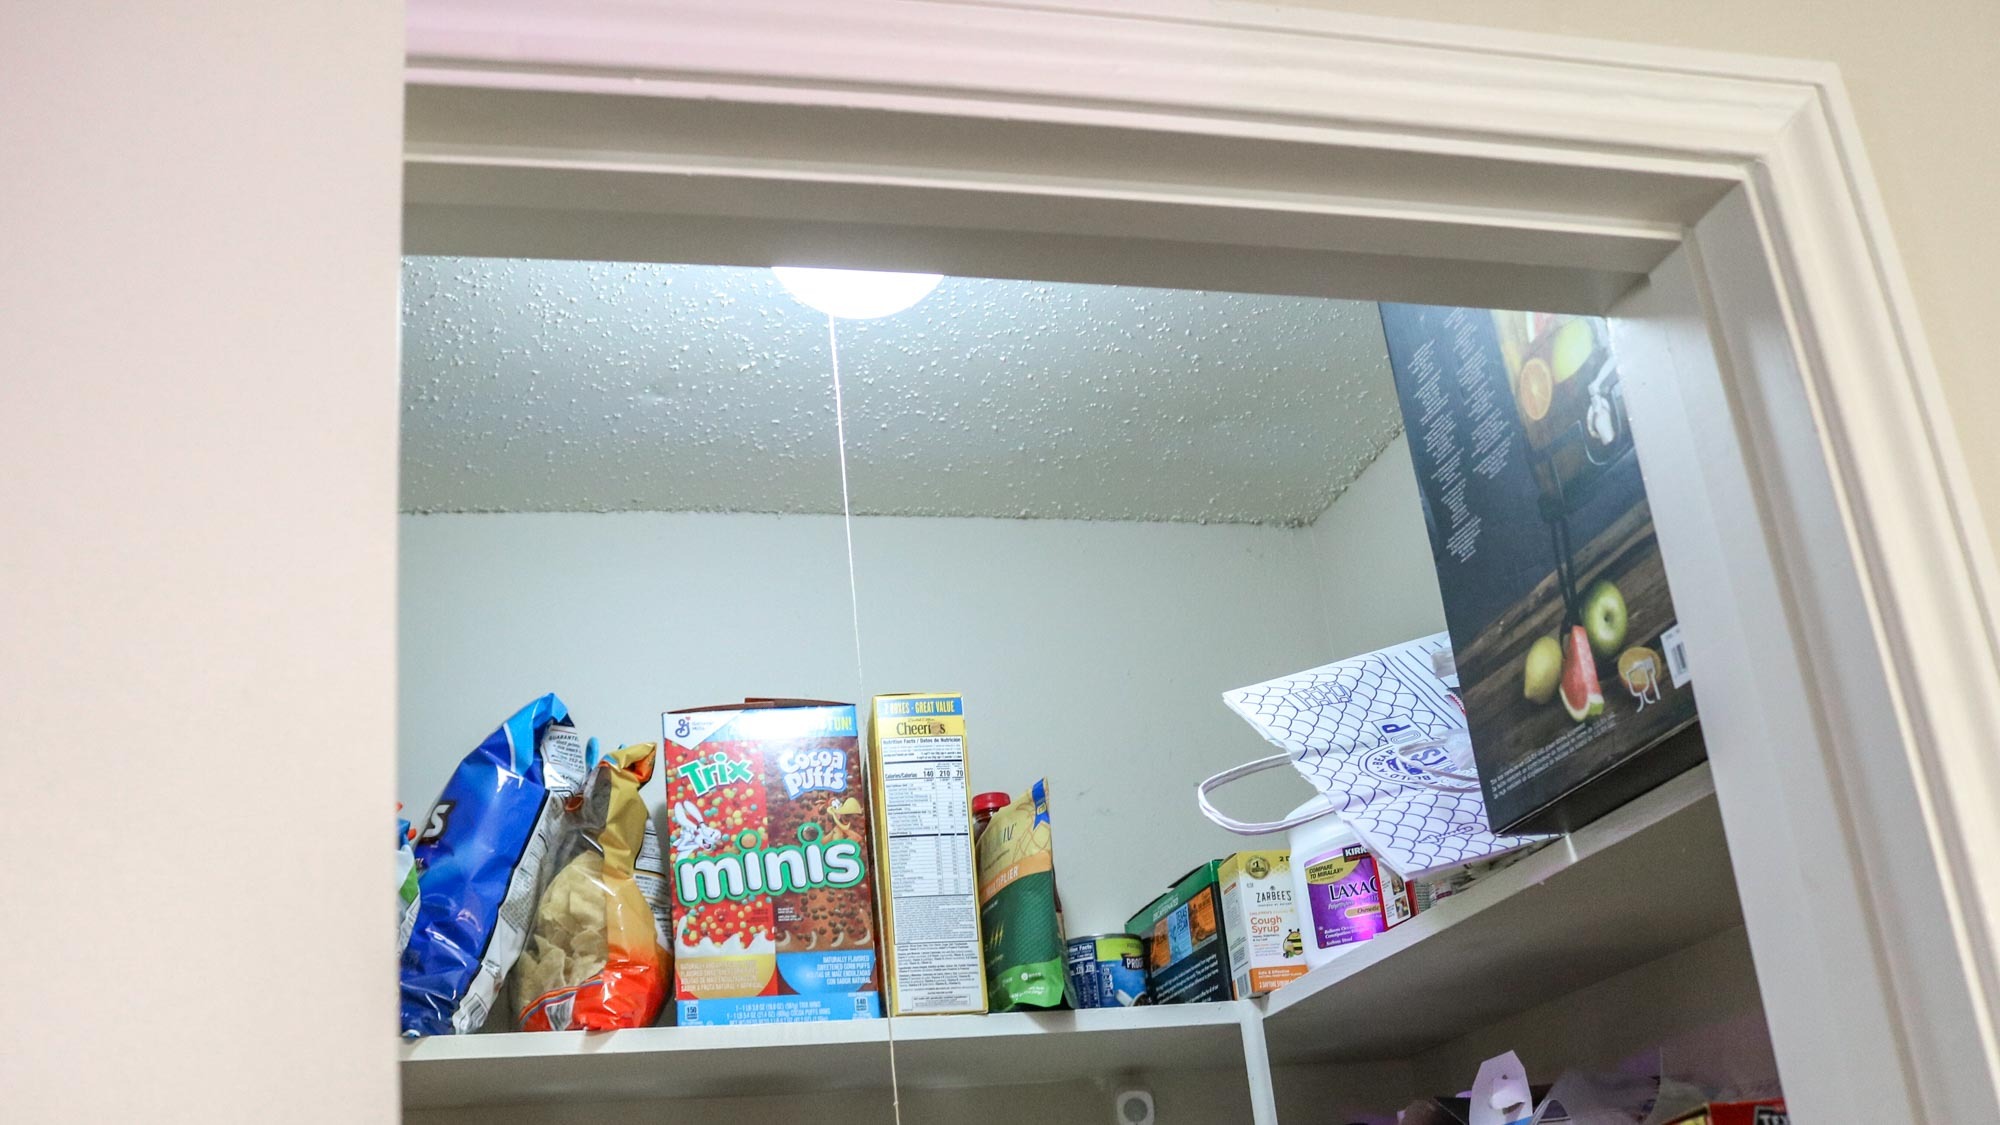 A pantry with a smart light bulb and a motion sensor to turn it on